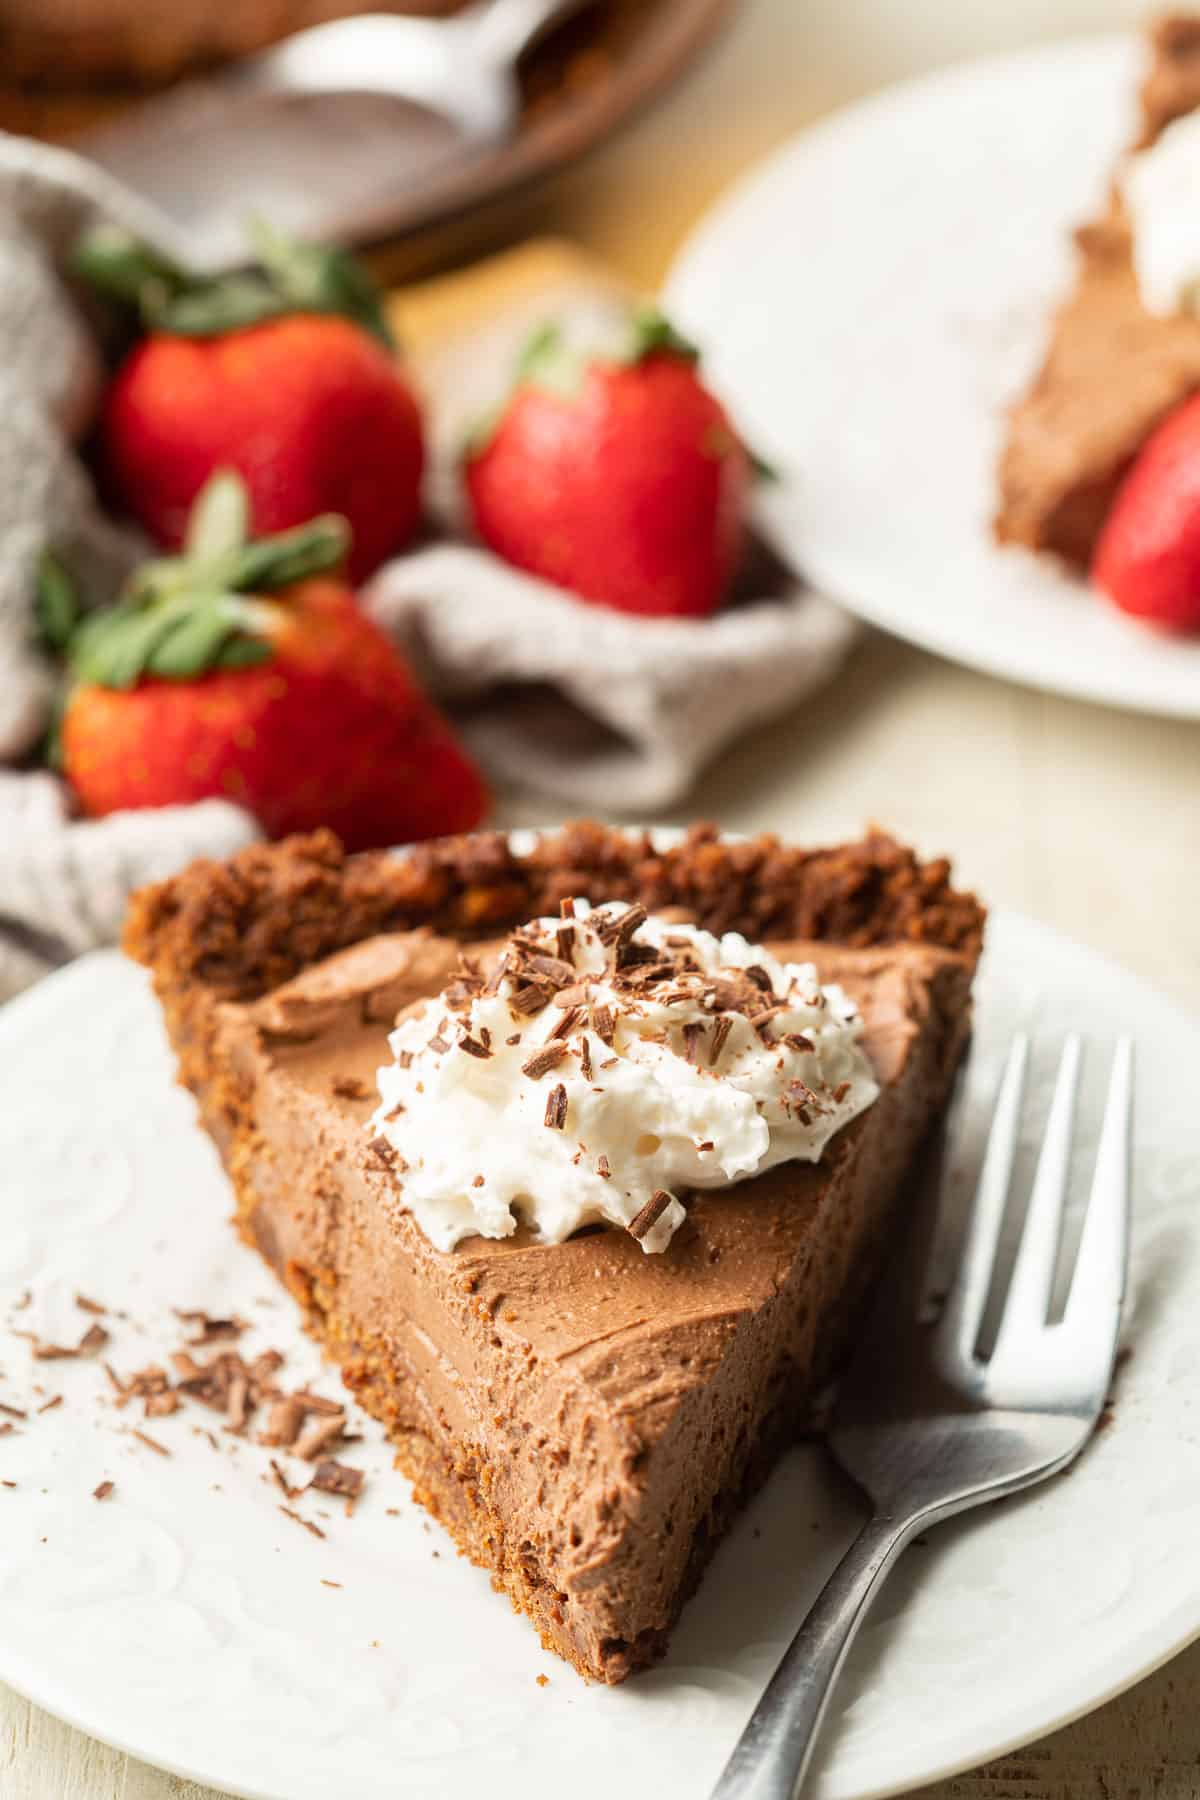 Slice of Vegan Chocolate Pie on a plate with strawberries in the background.